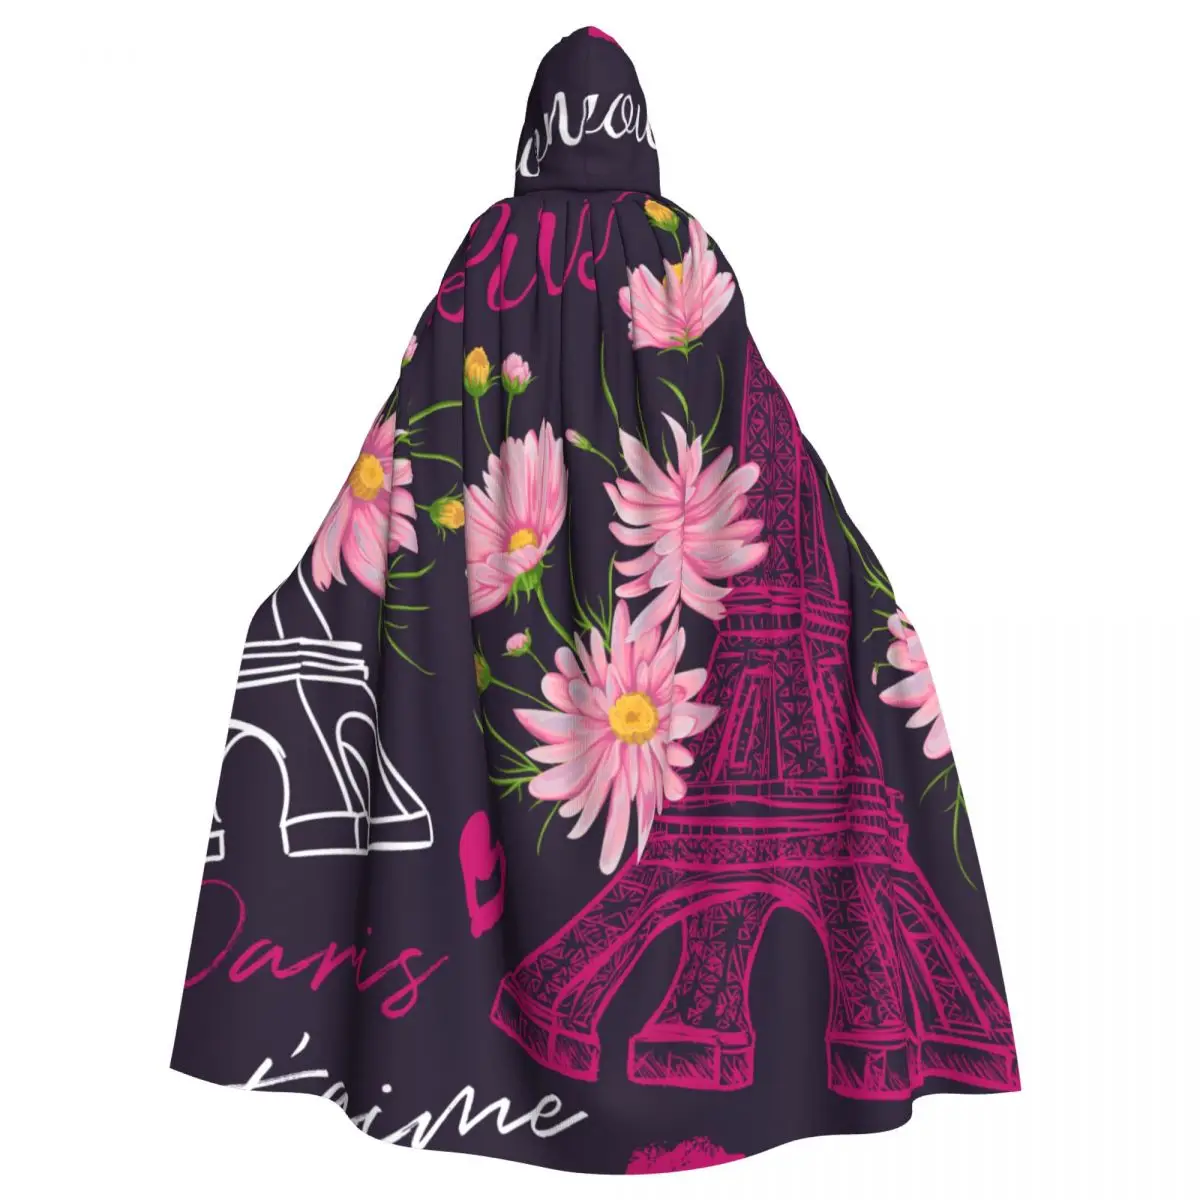 

Long Cape Cloak Vintage Eiffel Tower Kisses Hearts And Pink Chamomile Flowers In Watercolor Style Hooded Cloak Coat Hoodies